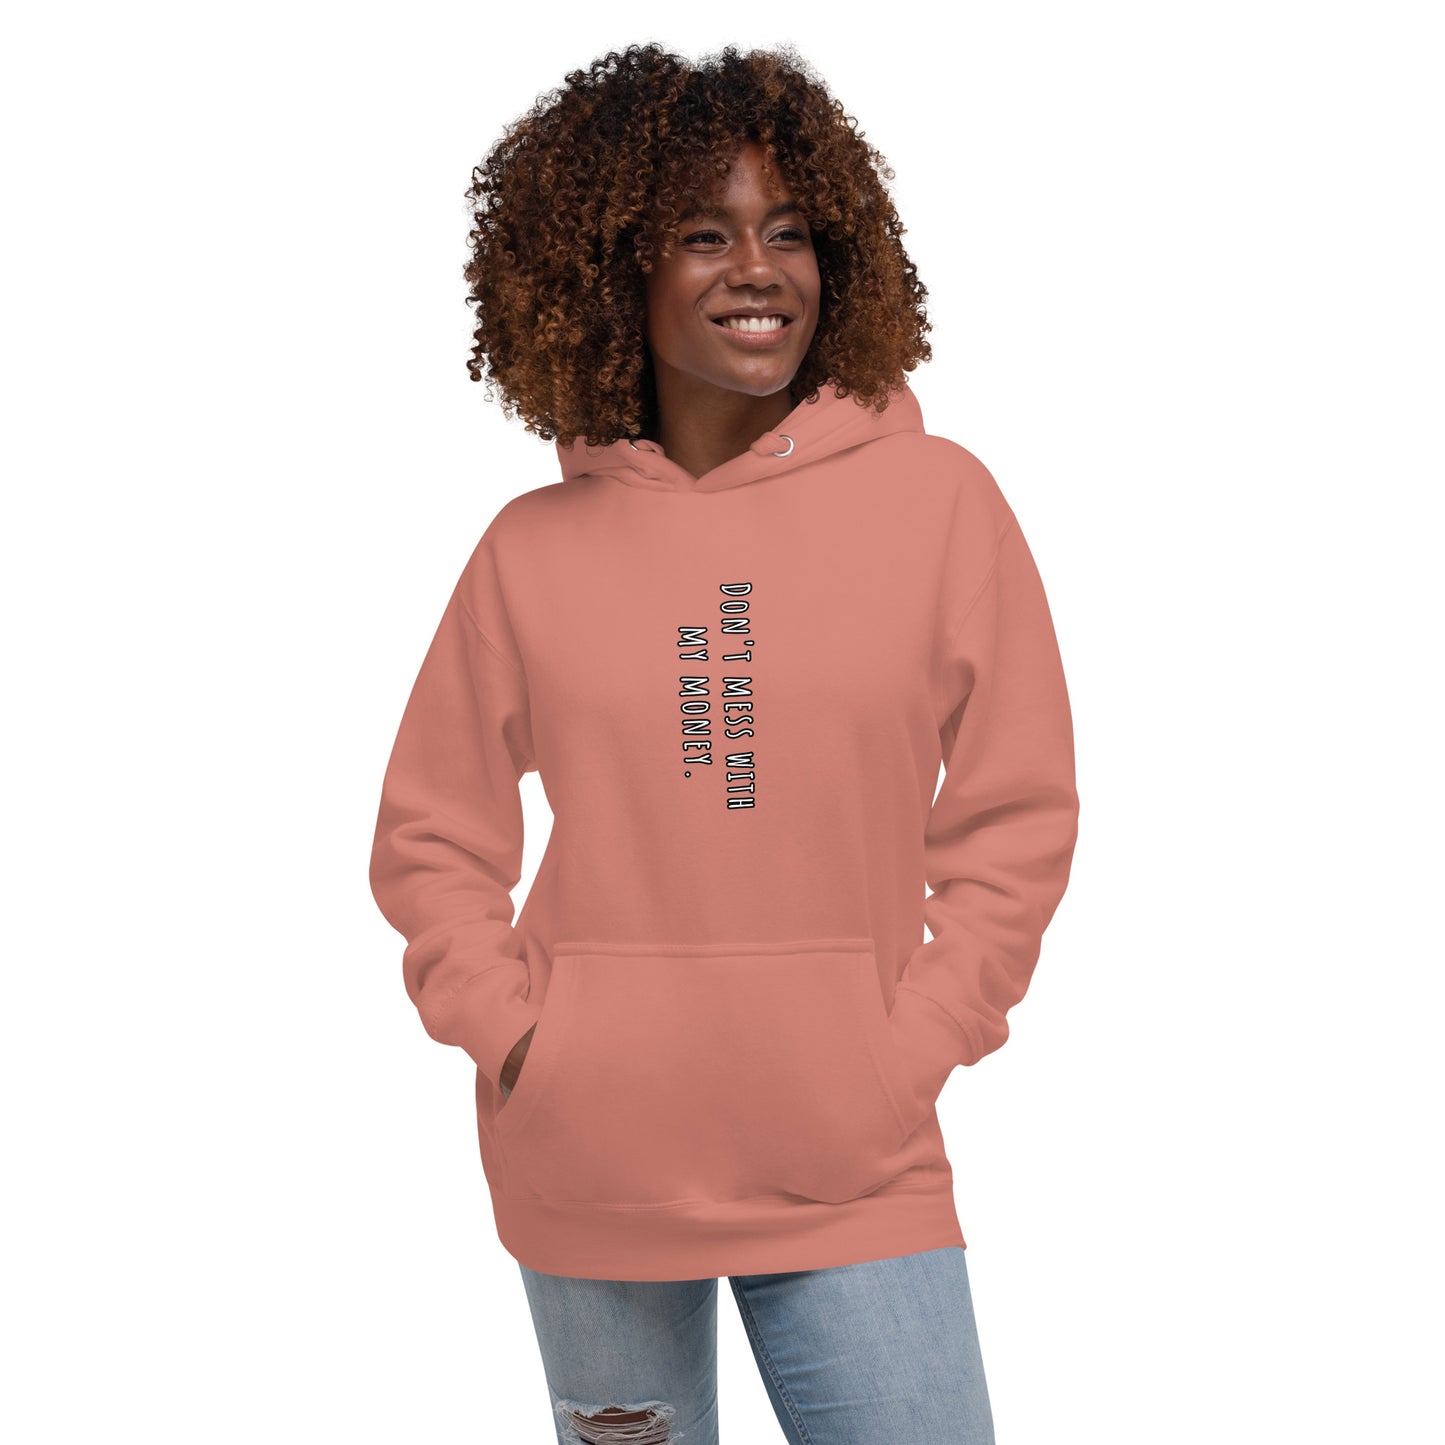 "Don't Mess with My Money" Hoodie